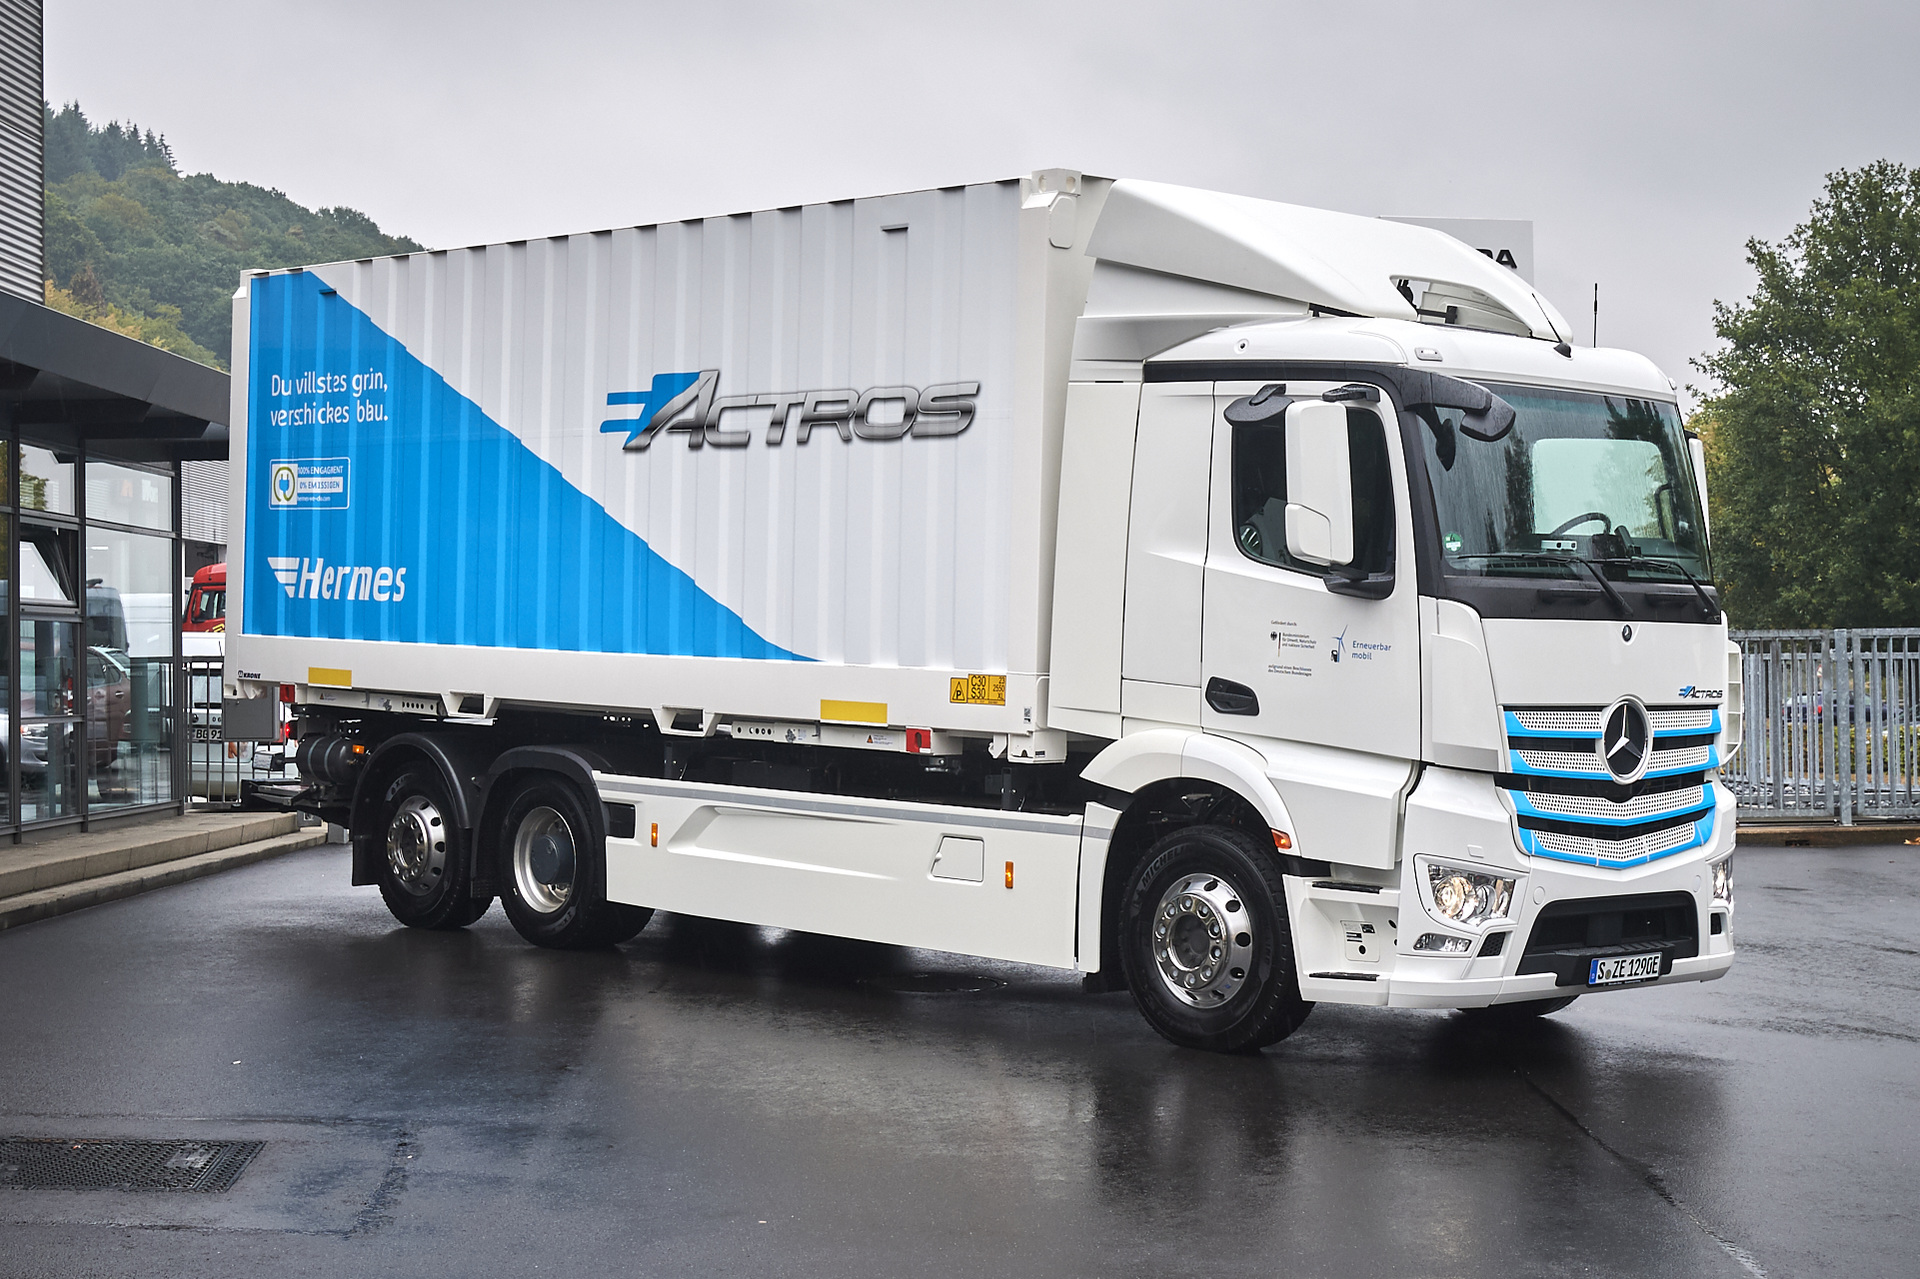 All-electric Mercedes-Benz truck for heavy-duty distribution: Start of practical customer trials: The Mercedes-Benz eActros is entering operation with Hermes